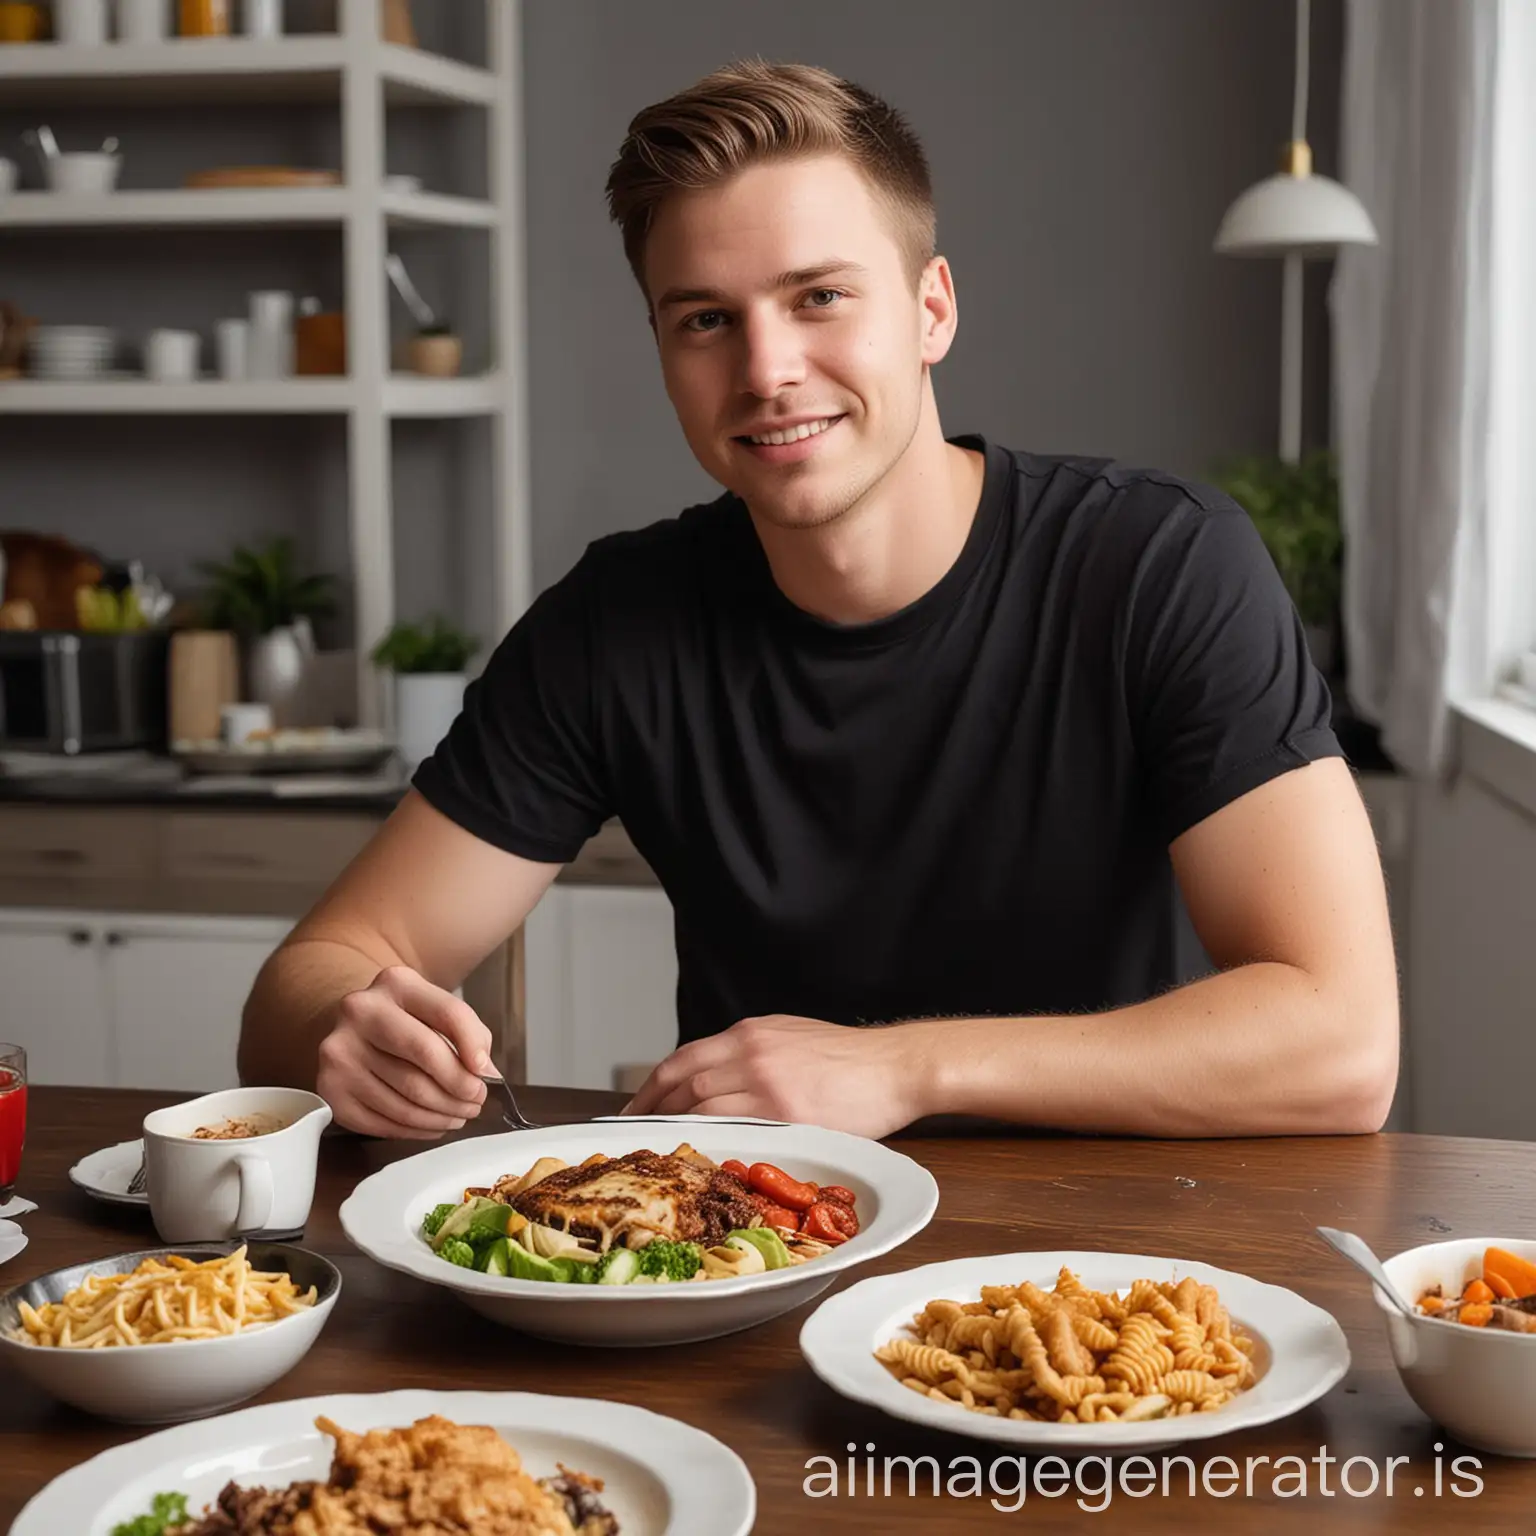 26 years old white american guy wearing black tshirt having dinner with American food at home